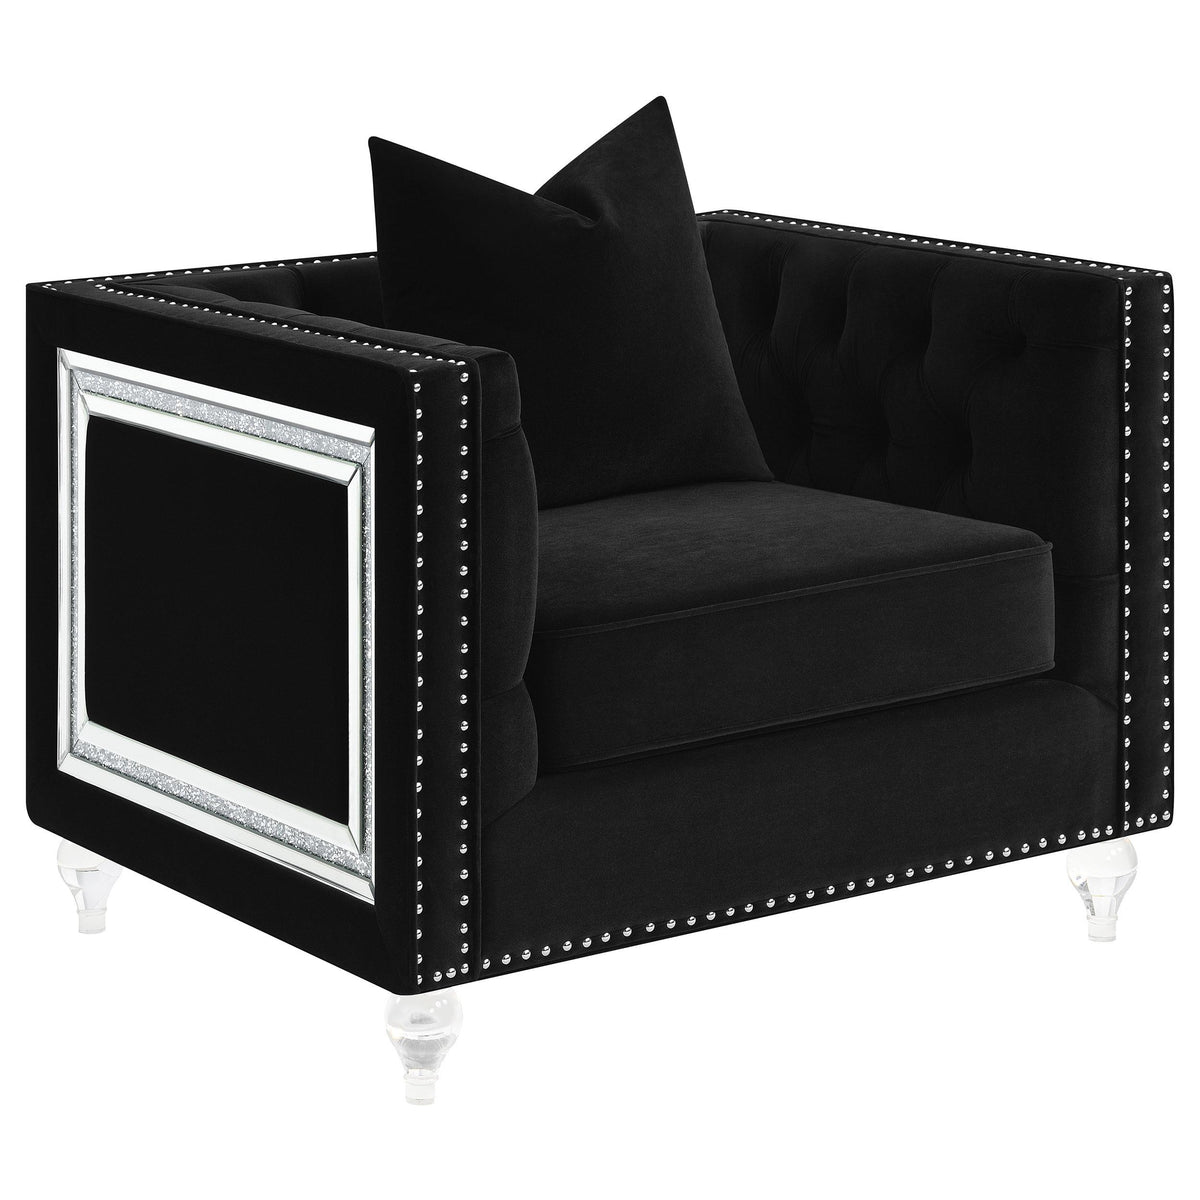 Delilah Upholstered Tufted Tuxedo Arm Chair Black Delilah Upholstered Tufted Tuxedo Arm Chair Black Half Price Furniture